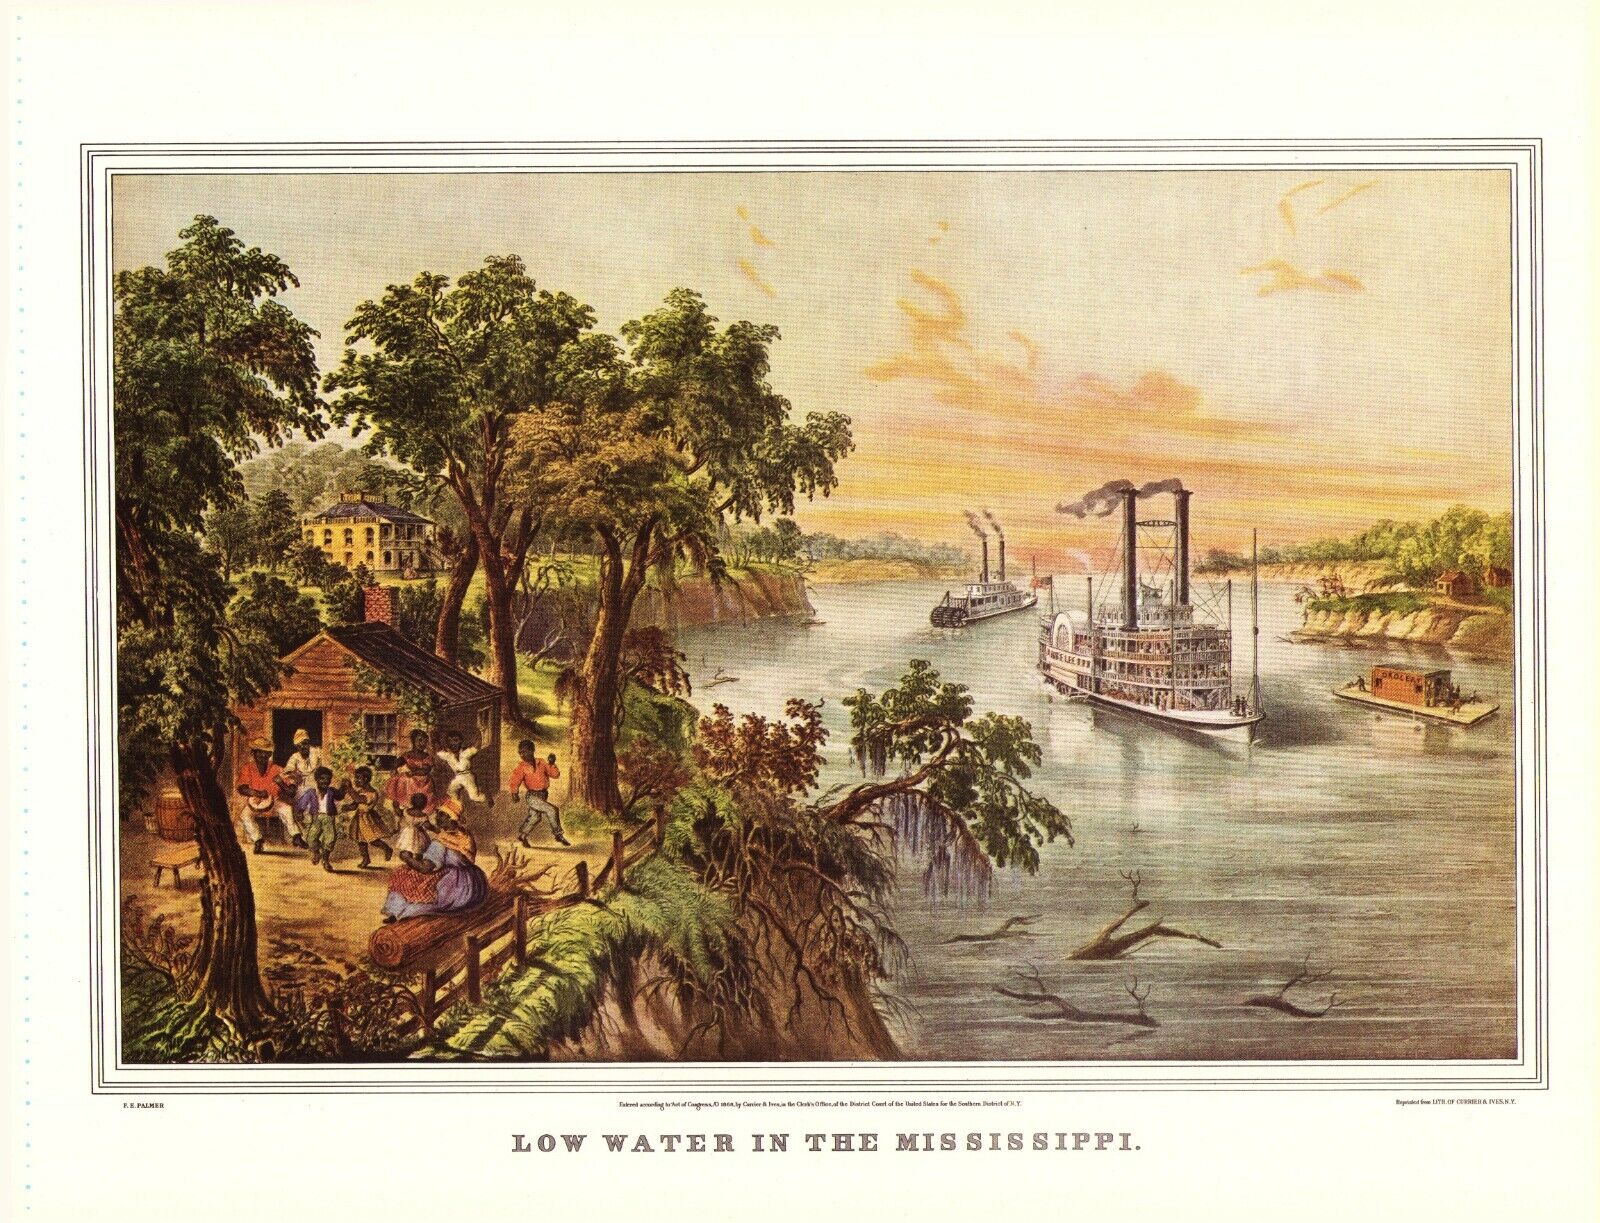 1952 CURRIER & IVES MISSISSIPPI RIVER  DANCING SLAVES 12x15 PRINT LITHOGRAPH